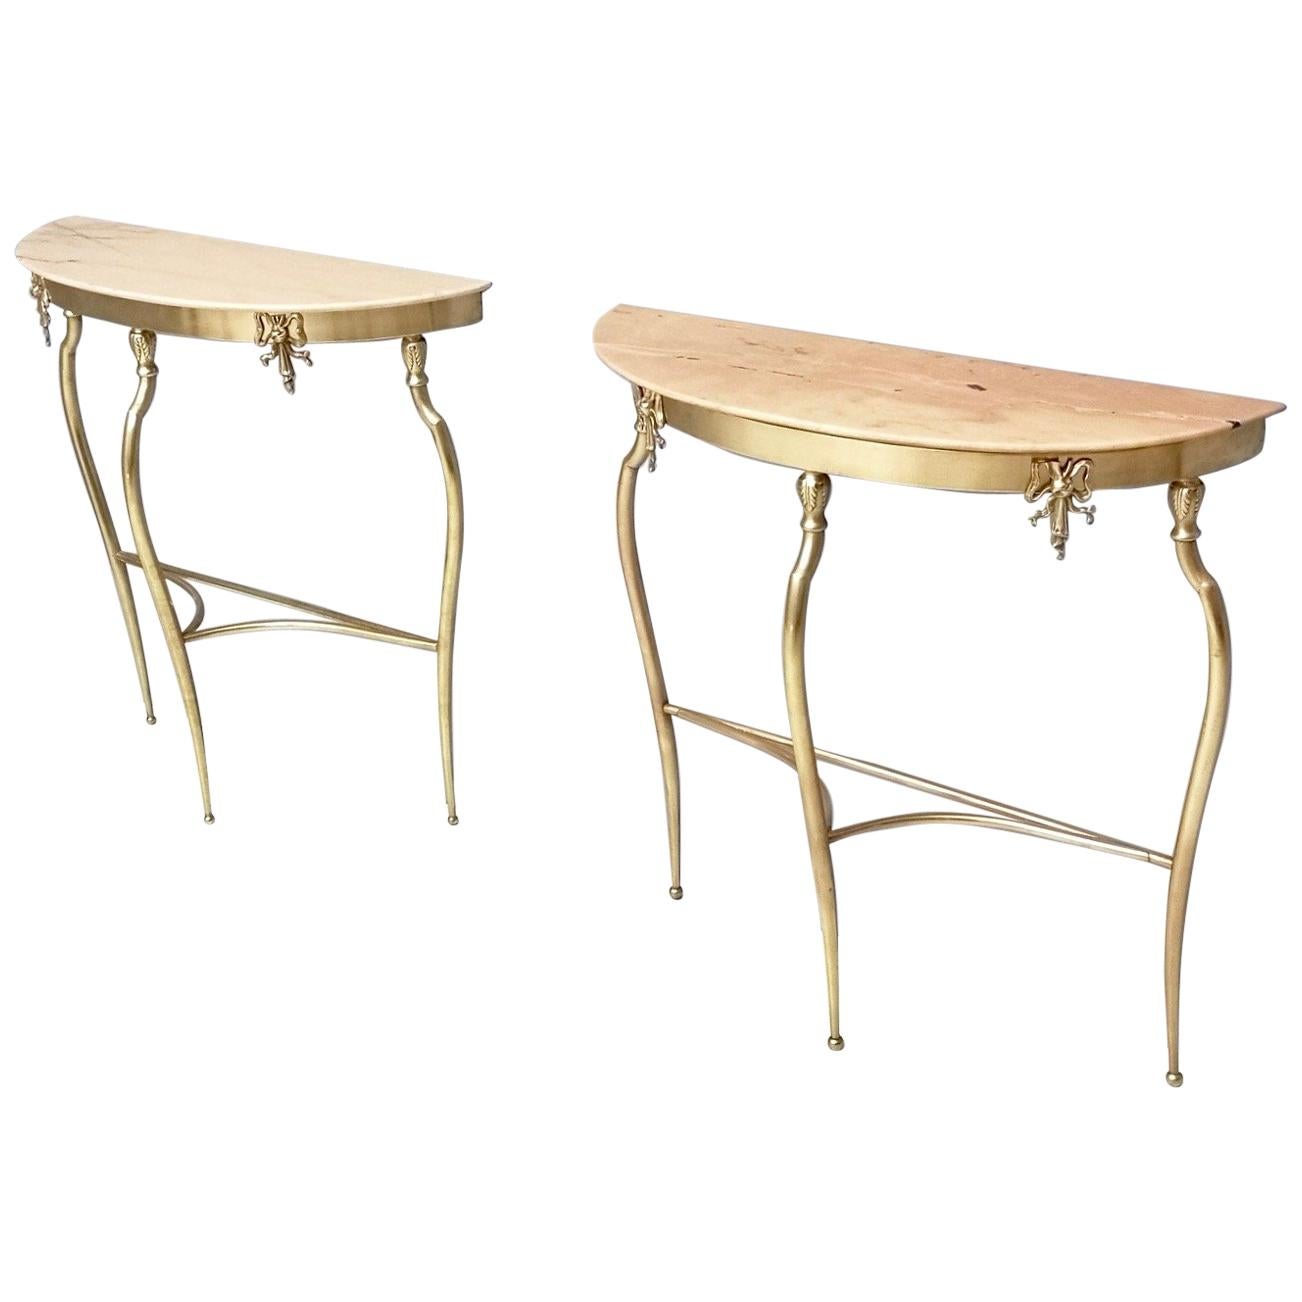 Pair of Console Tables with Demilune Portuguese Pink Marble Top, Italy, 1950s